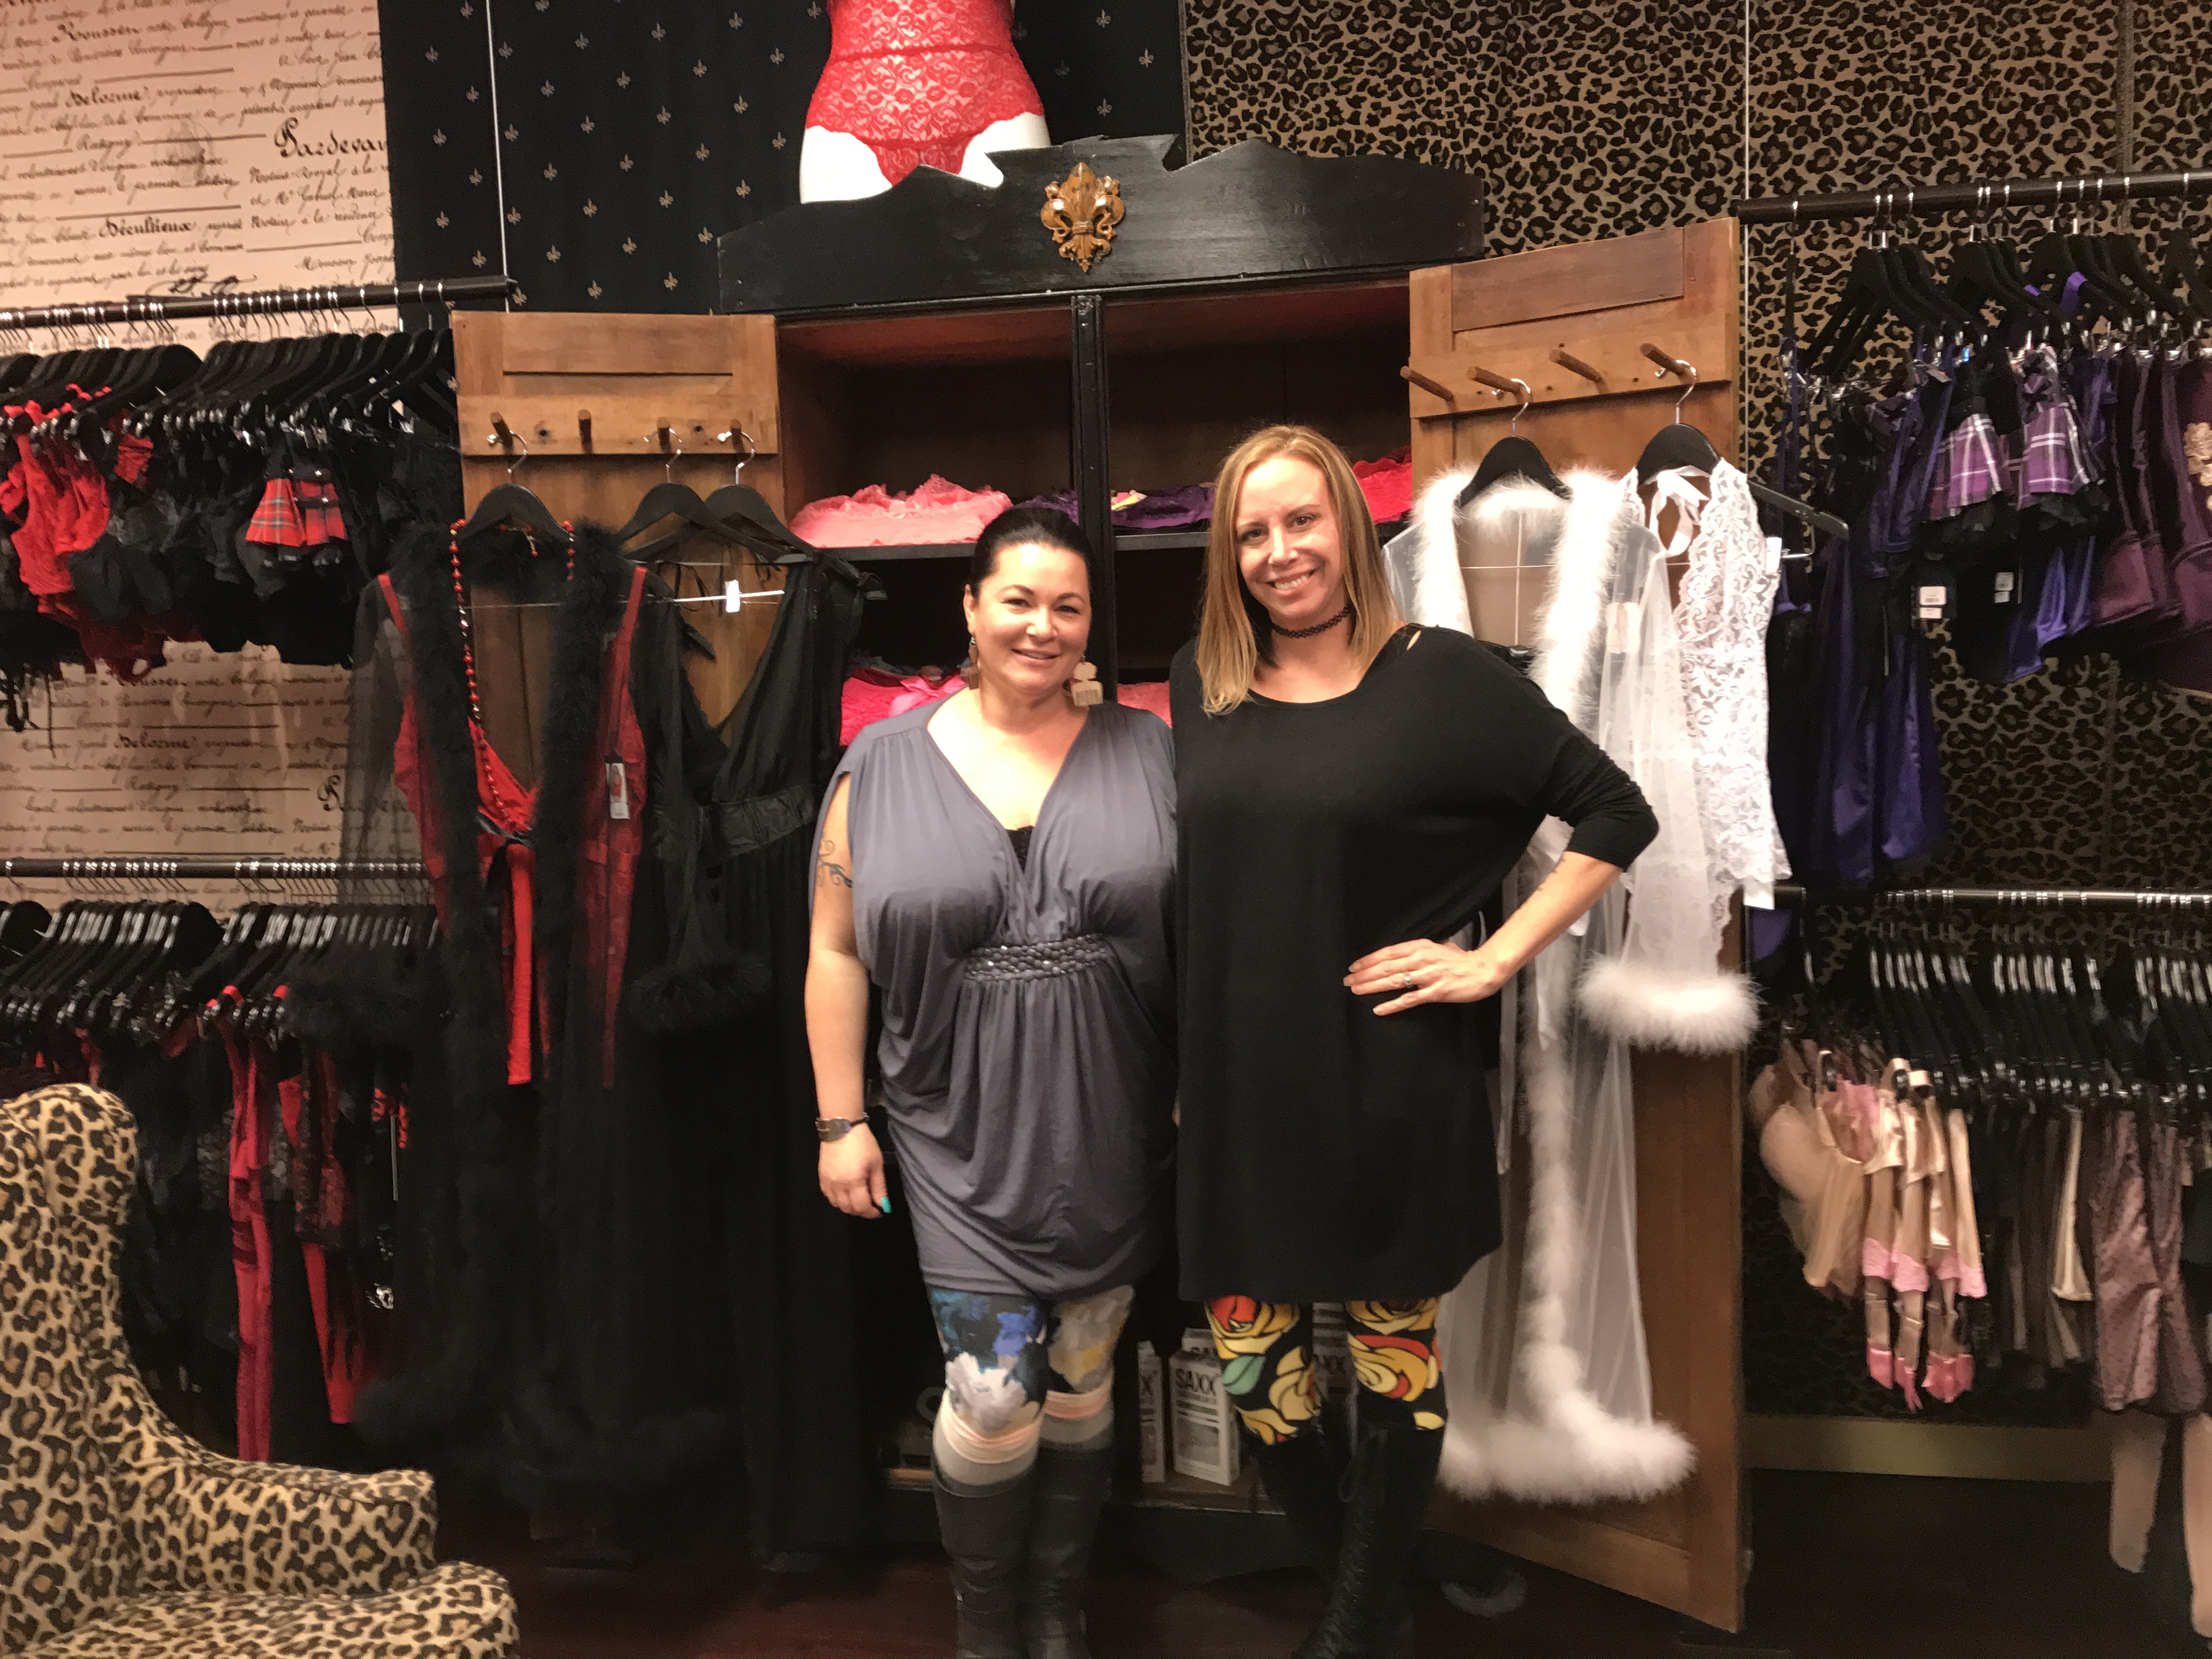 Lingerie company can keep window display of plus-sized women